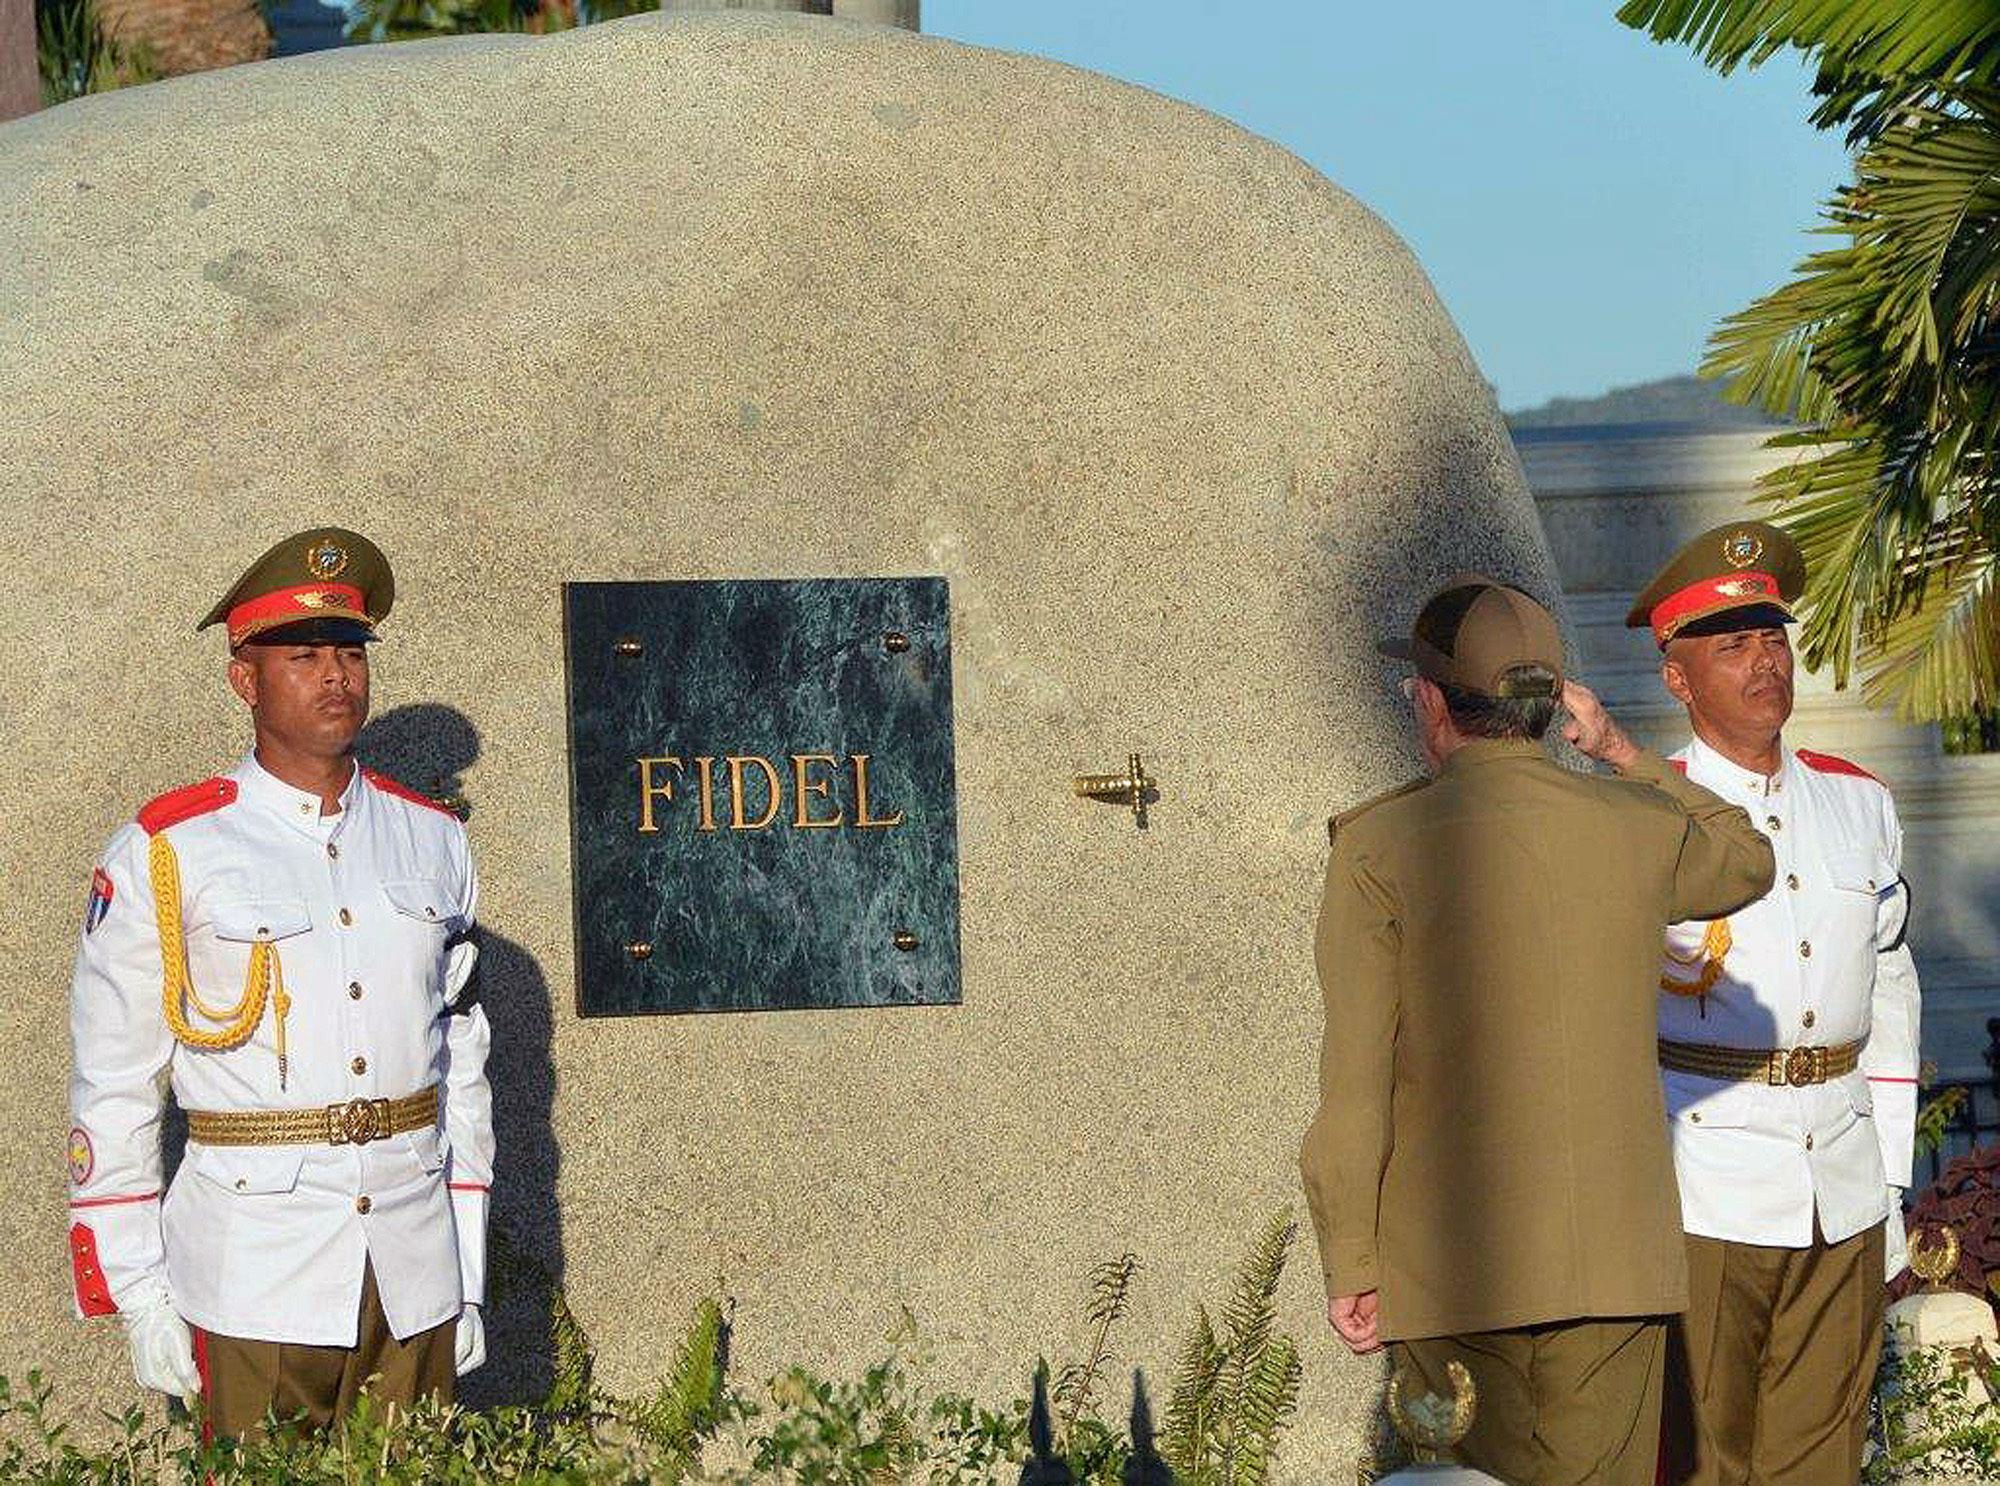 Castro’s ashes were interred by his brother, Raul Castro